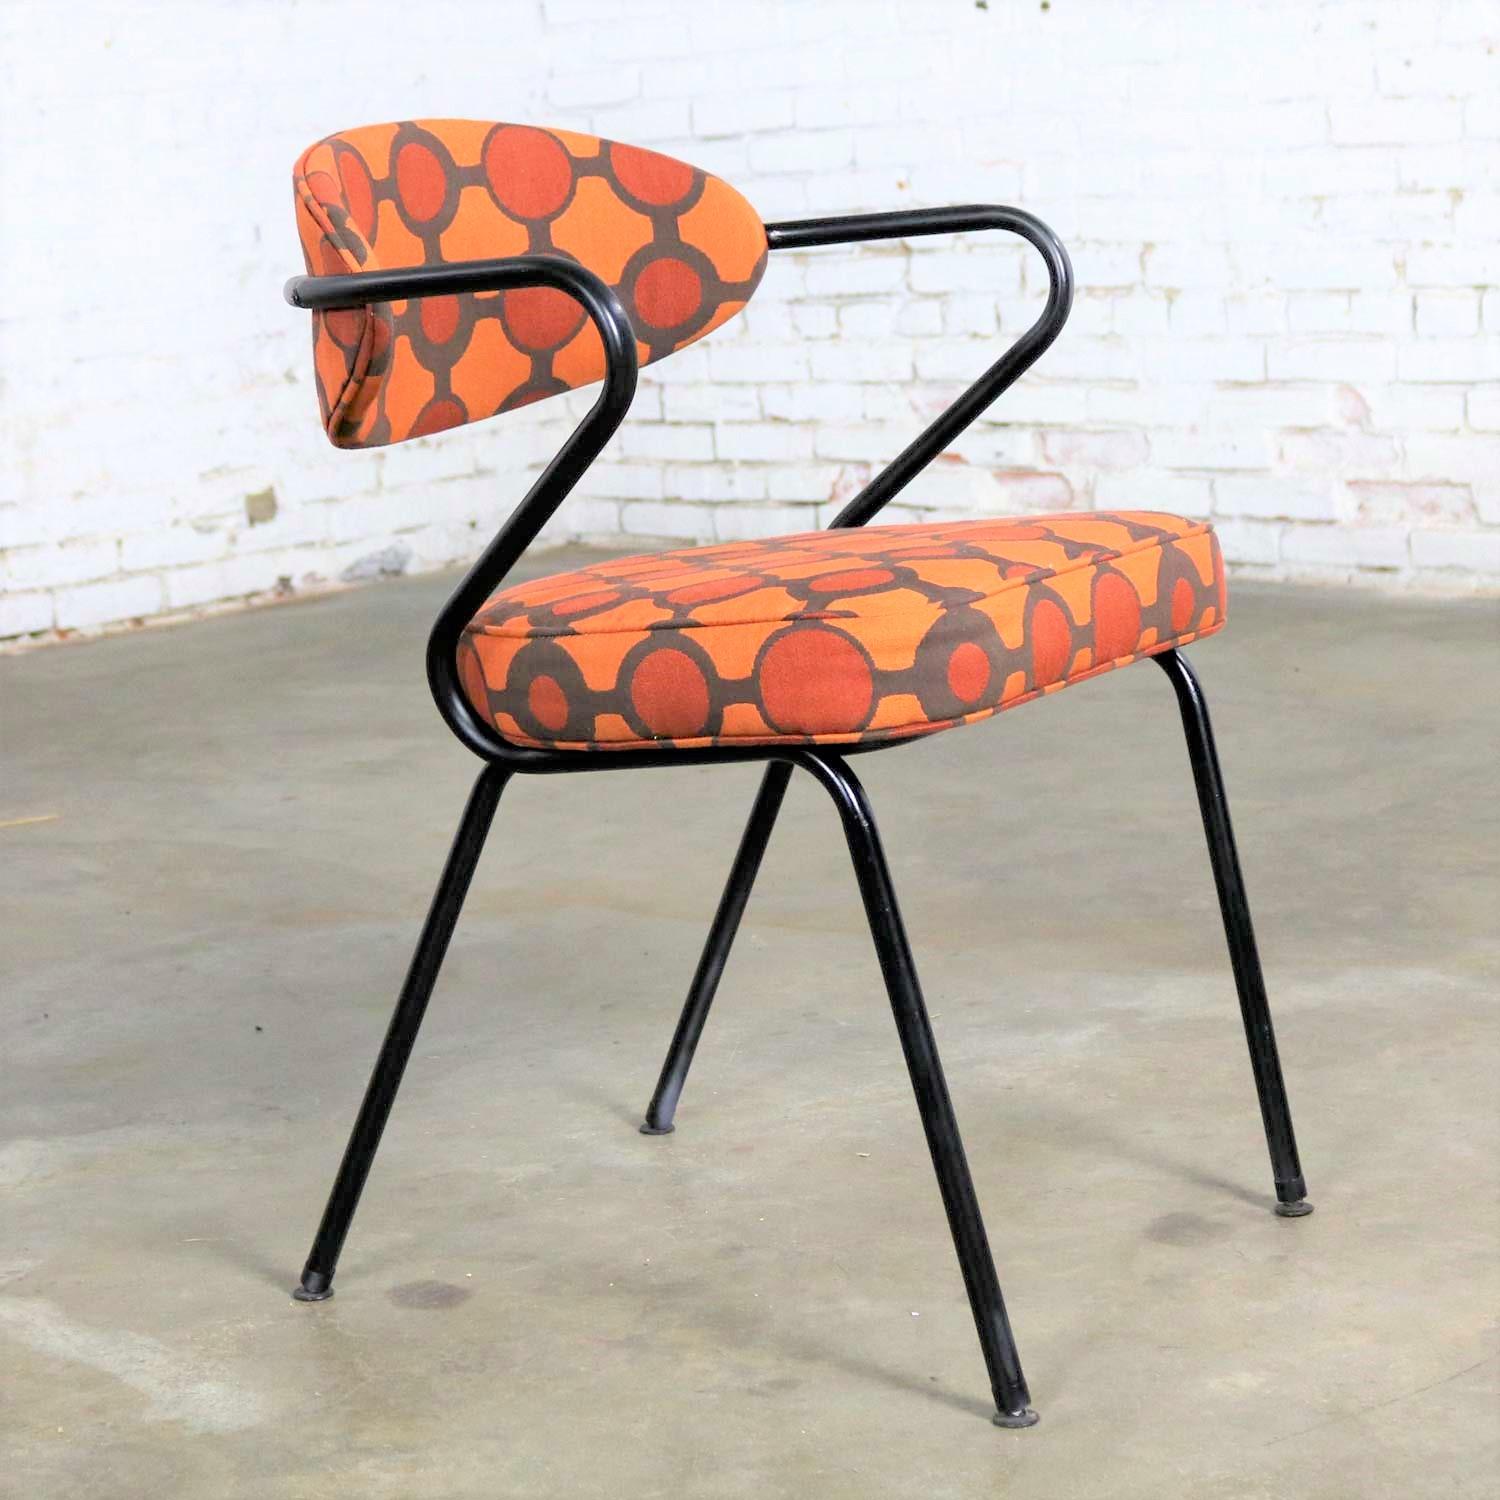 Painted Mid-Century Modern Black Bent Steel Tube Armchair with New Orange Upholstery For Sale